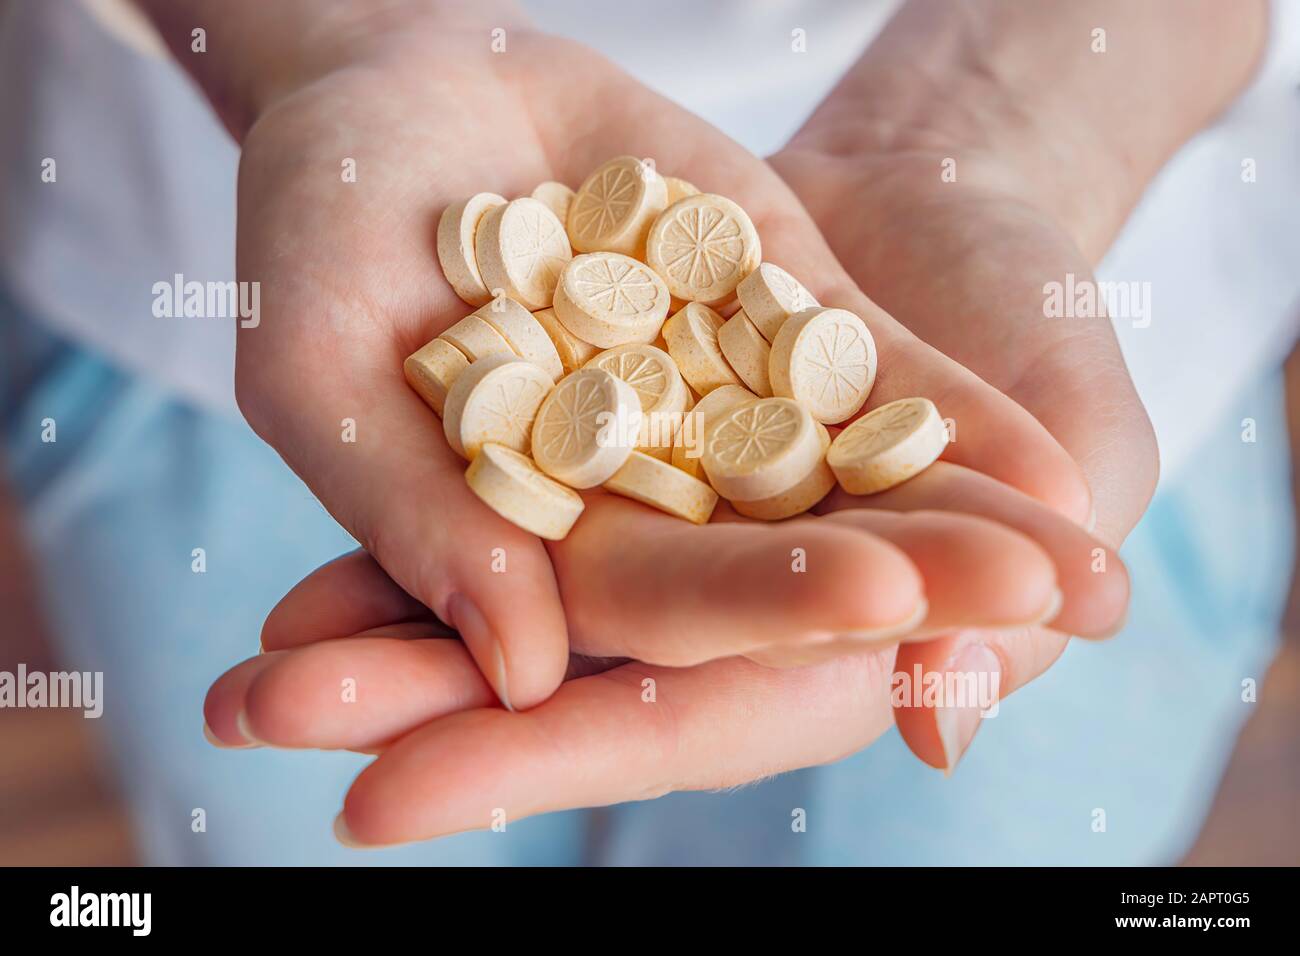 A woman holds vitamins pills in her hands. Vitamin C provides an essential nutrient for healthy bones, cartilage, teeth, and gums. An antioxidant for Stock Photo